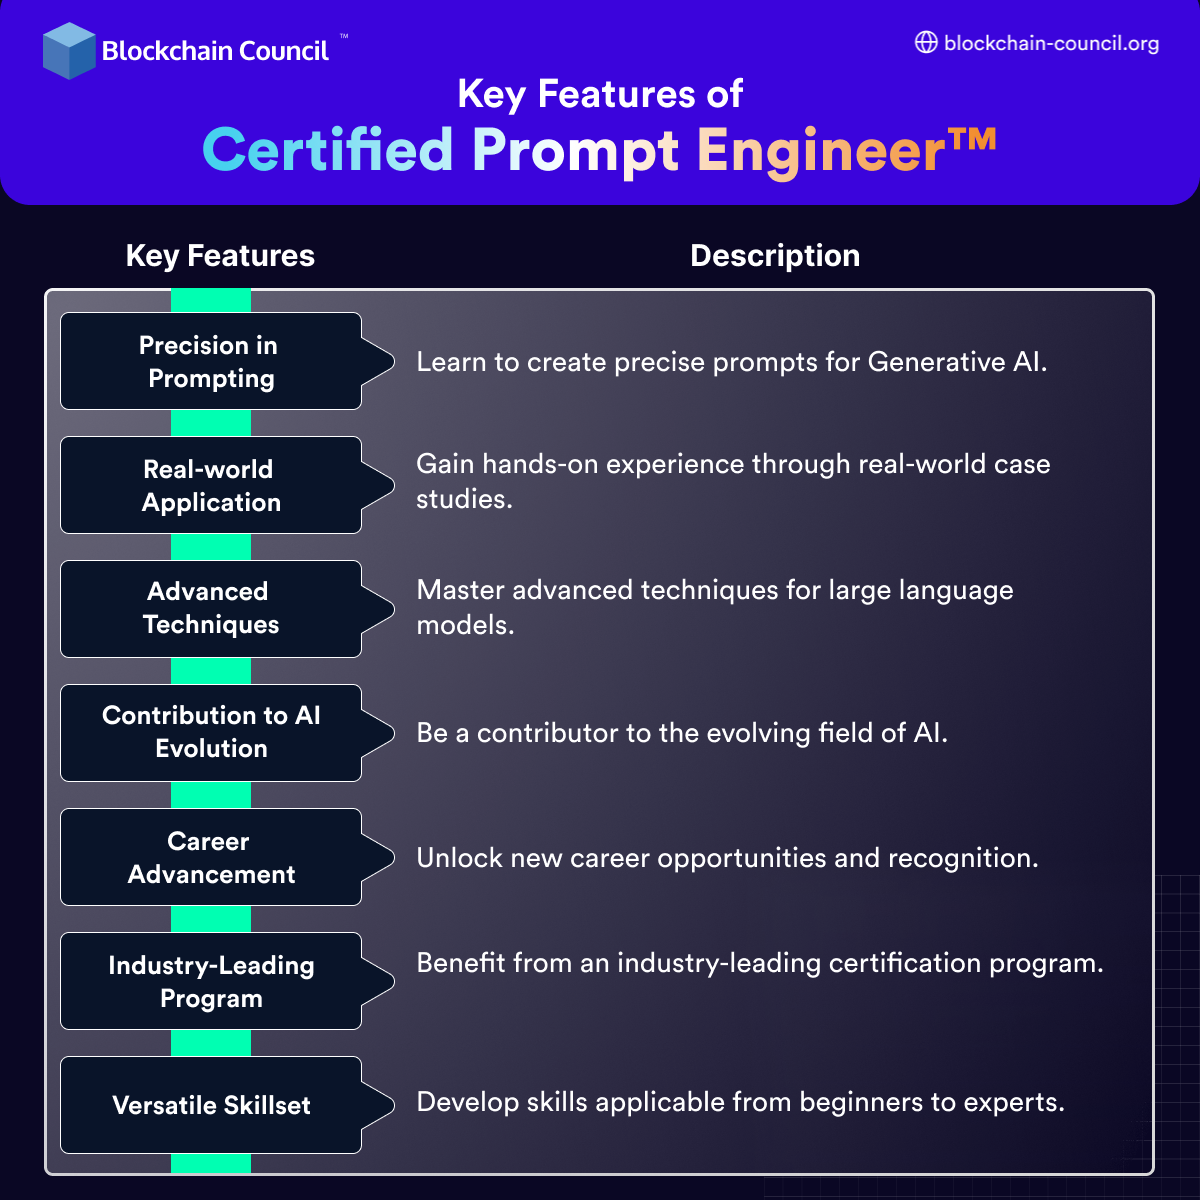 Key Features of Certified Prompt Engineer™